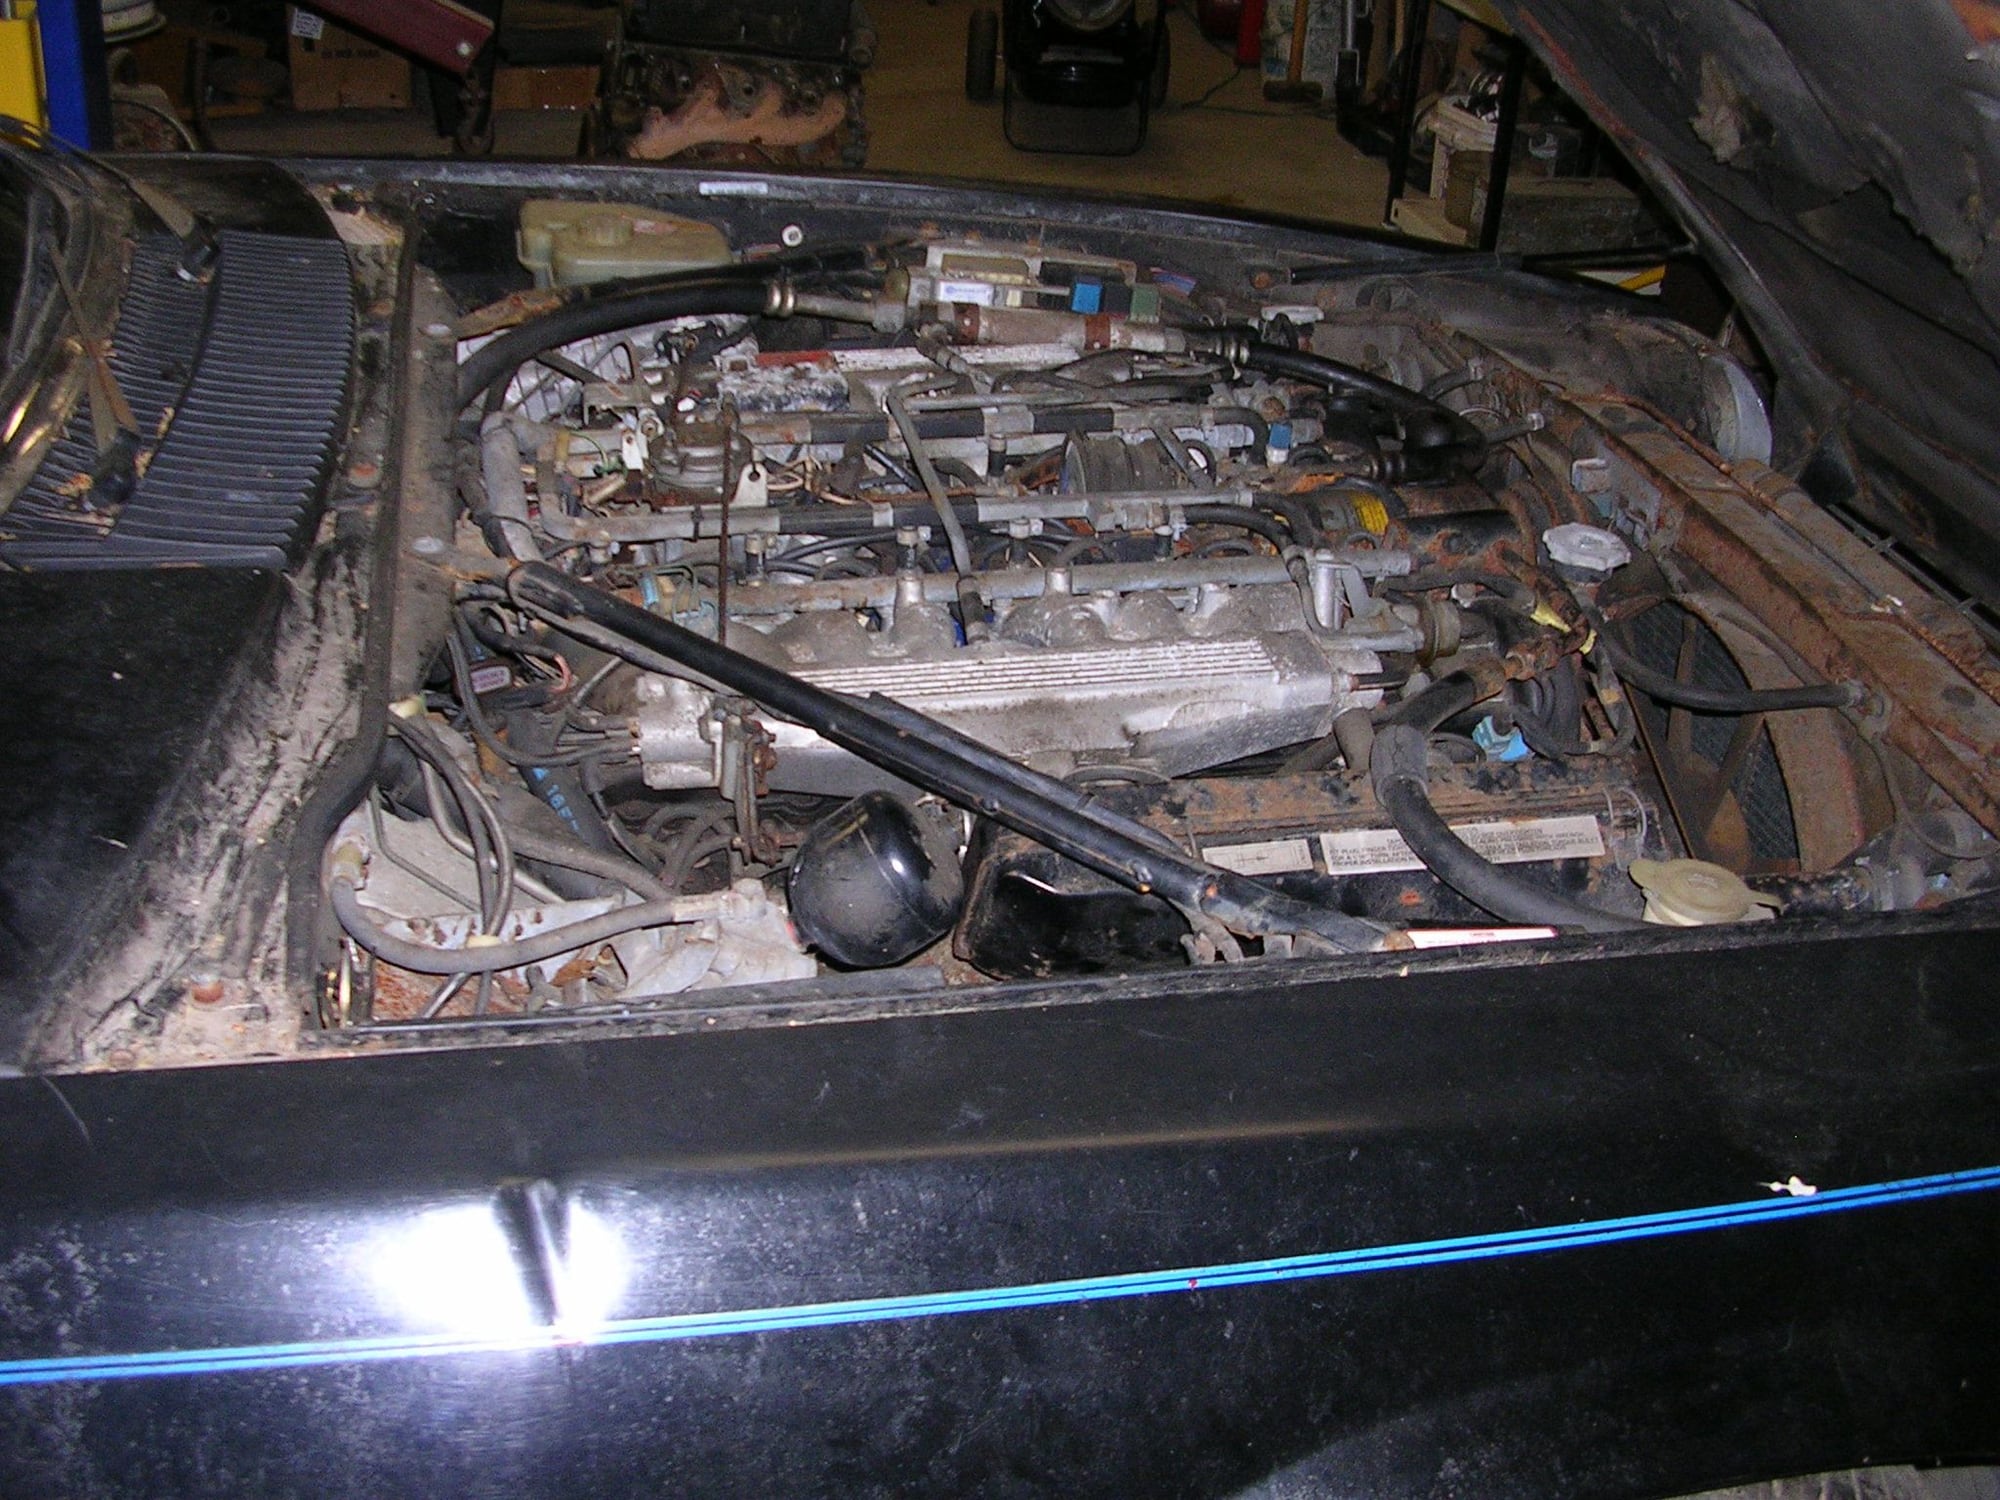 Engine - Complete - 89 V12 and Trans from my 89 Parts car - Used - 1989 to 1990 Jaguar XJS - Tuckerman, AR 72473, United States